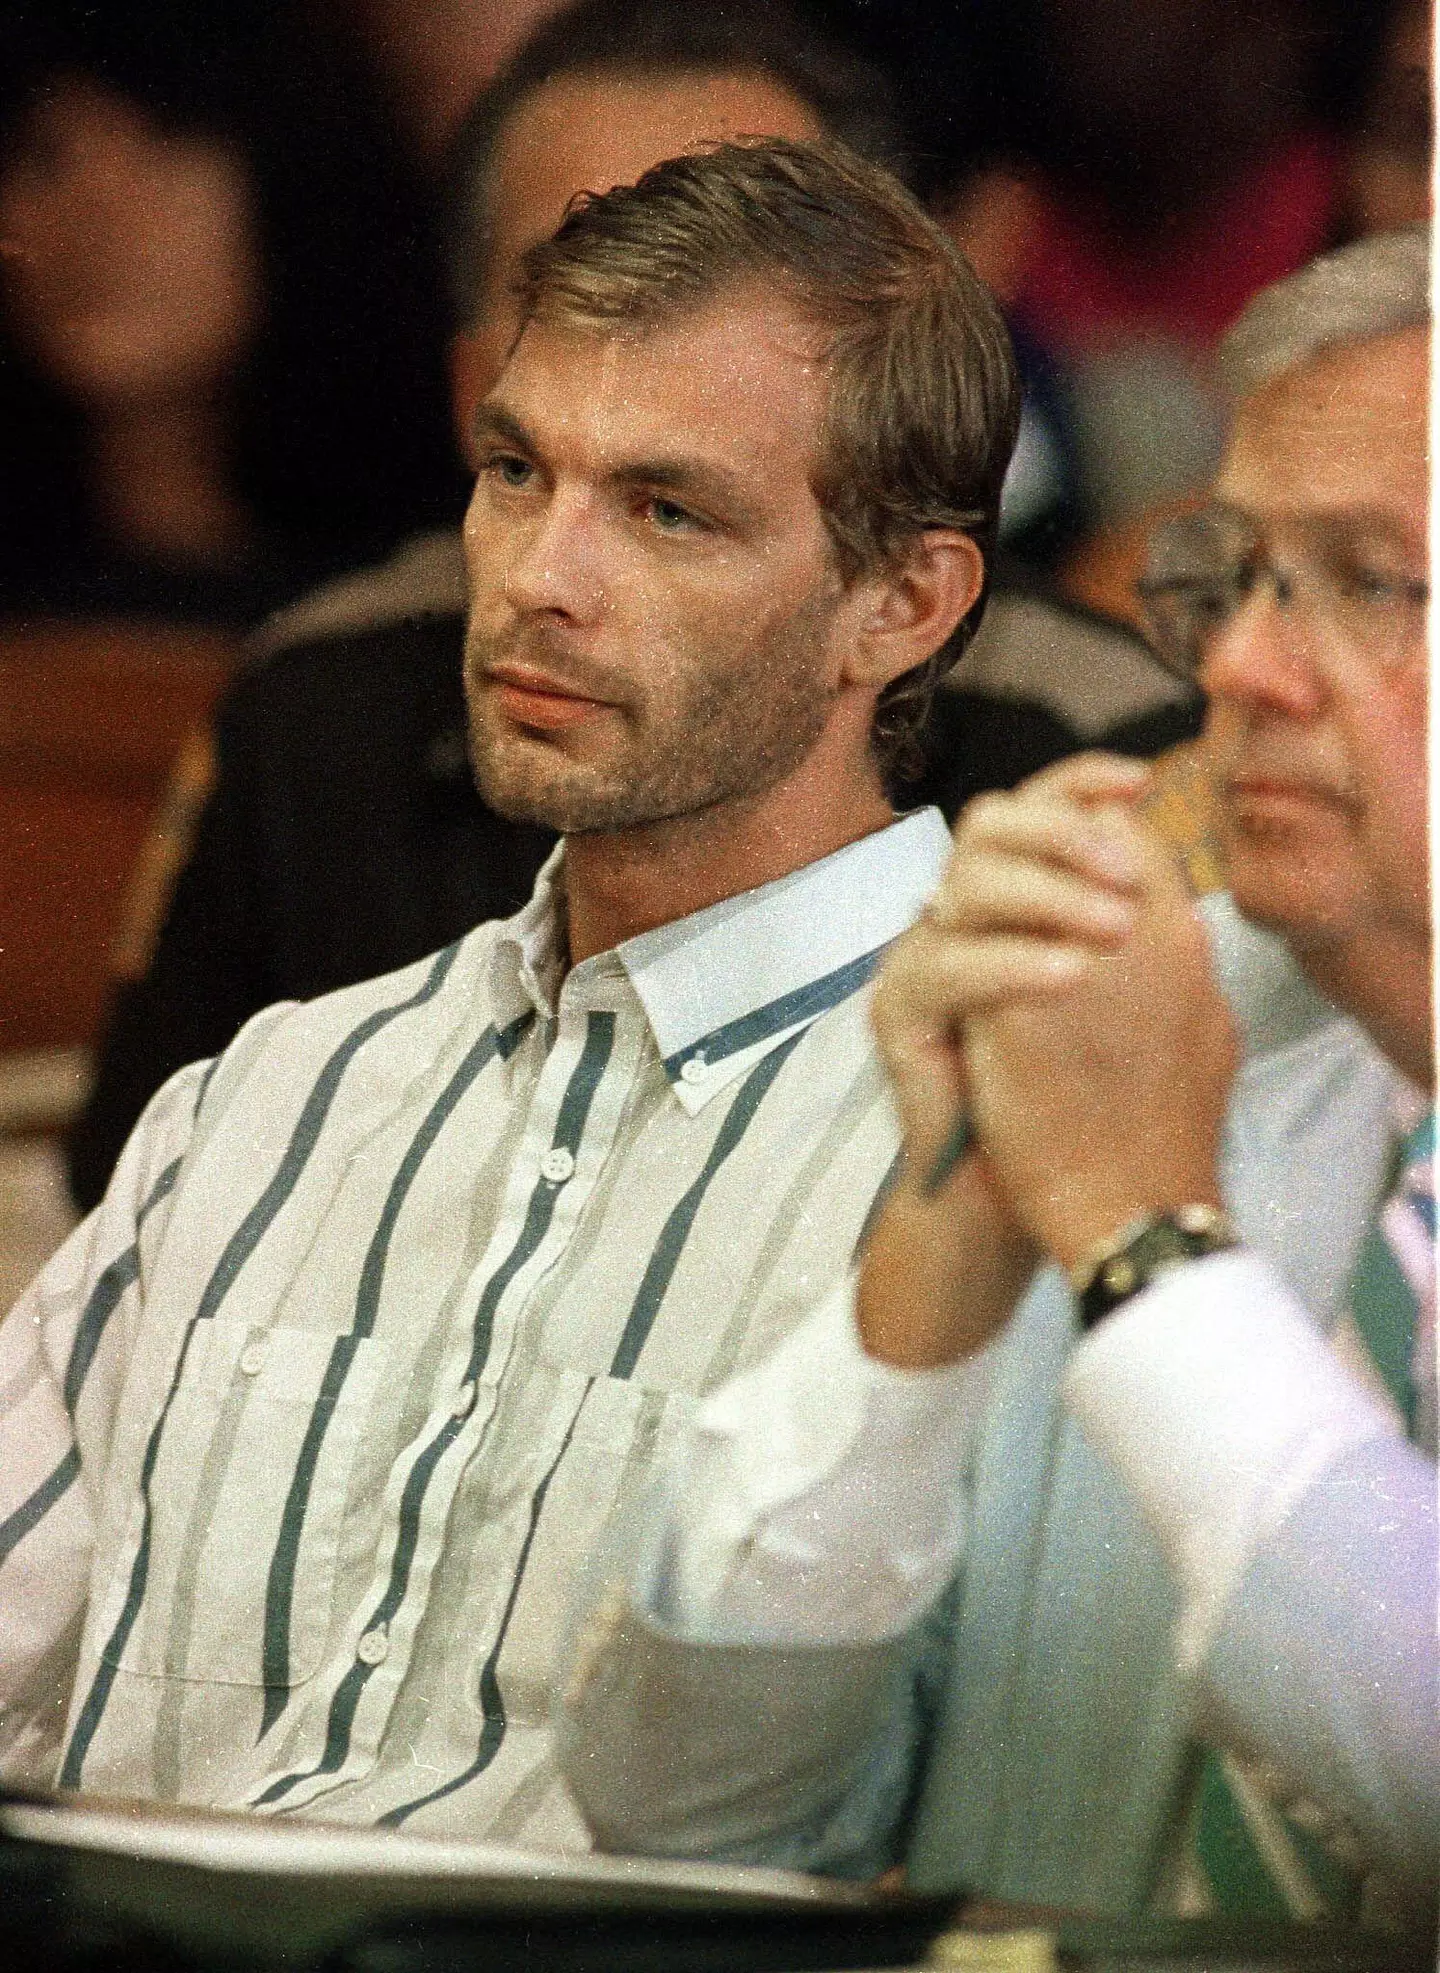 Dahmer confessed to murdering at least 17 people, having evaded police throughout his killing spree, which spread over 13 years.